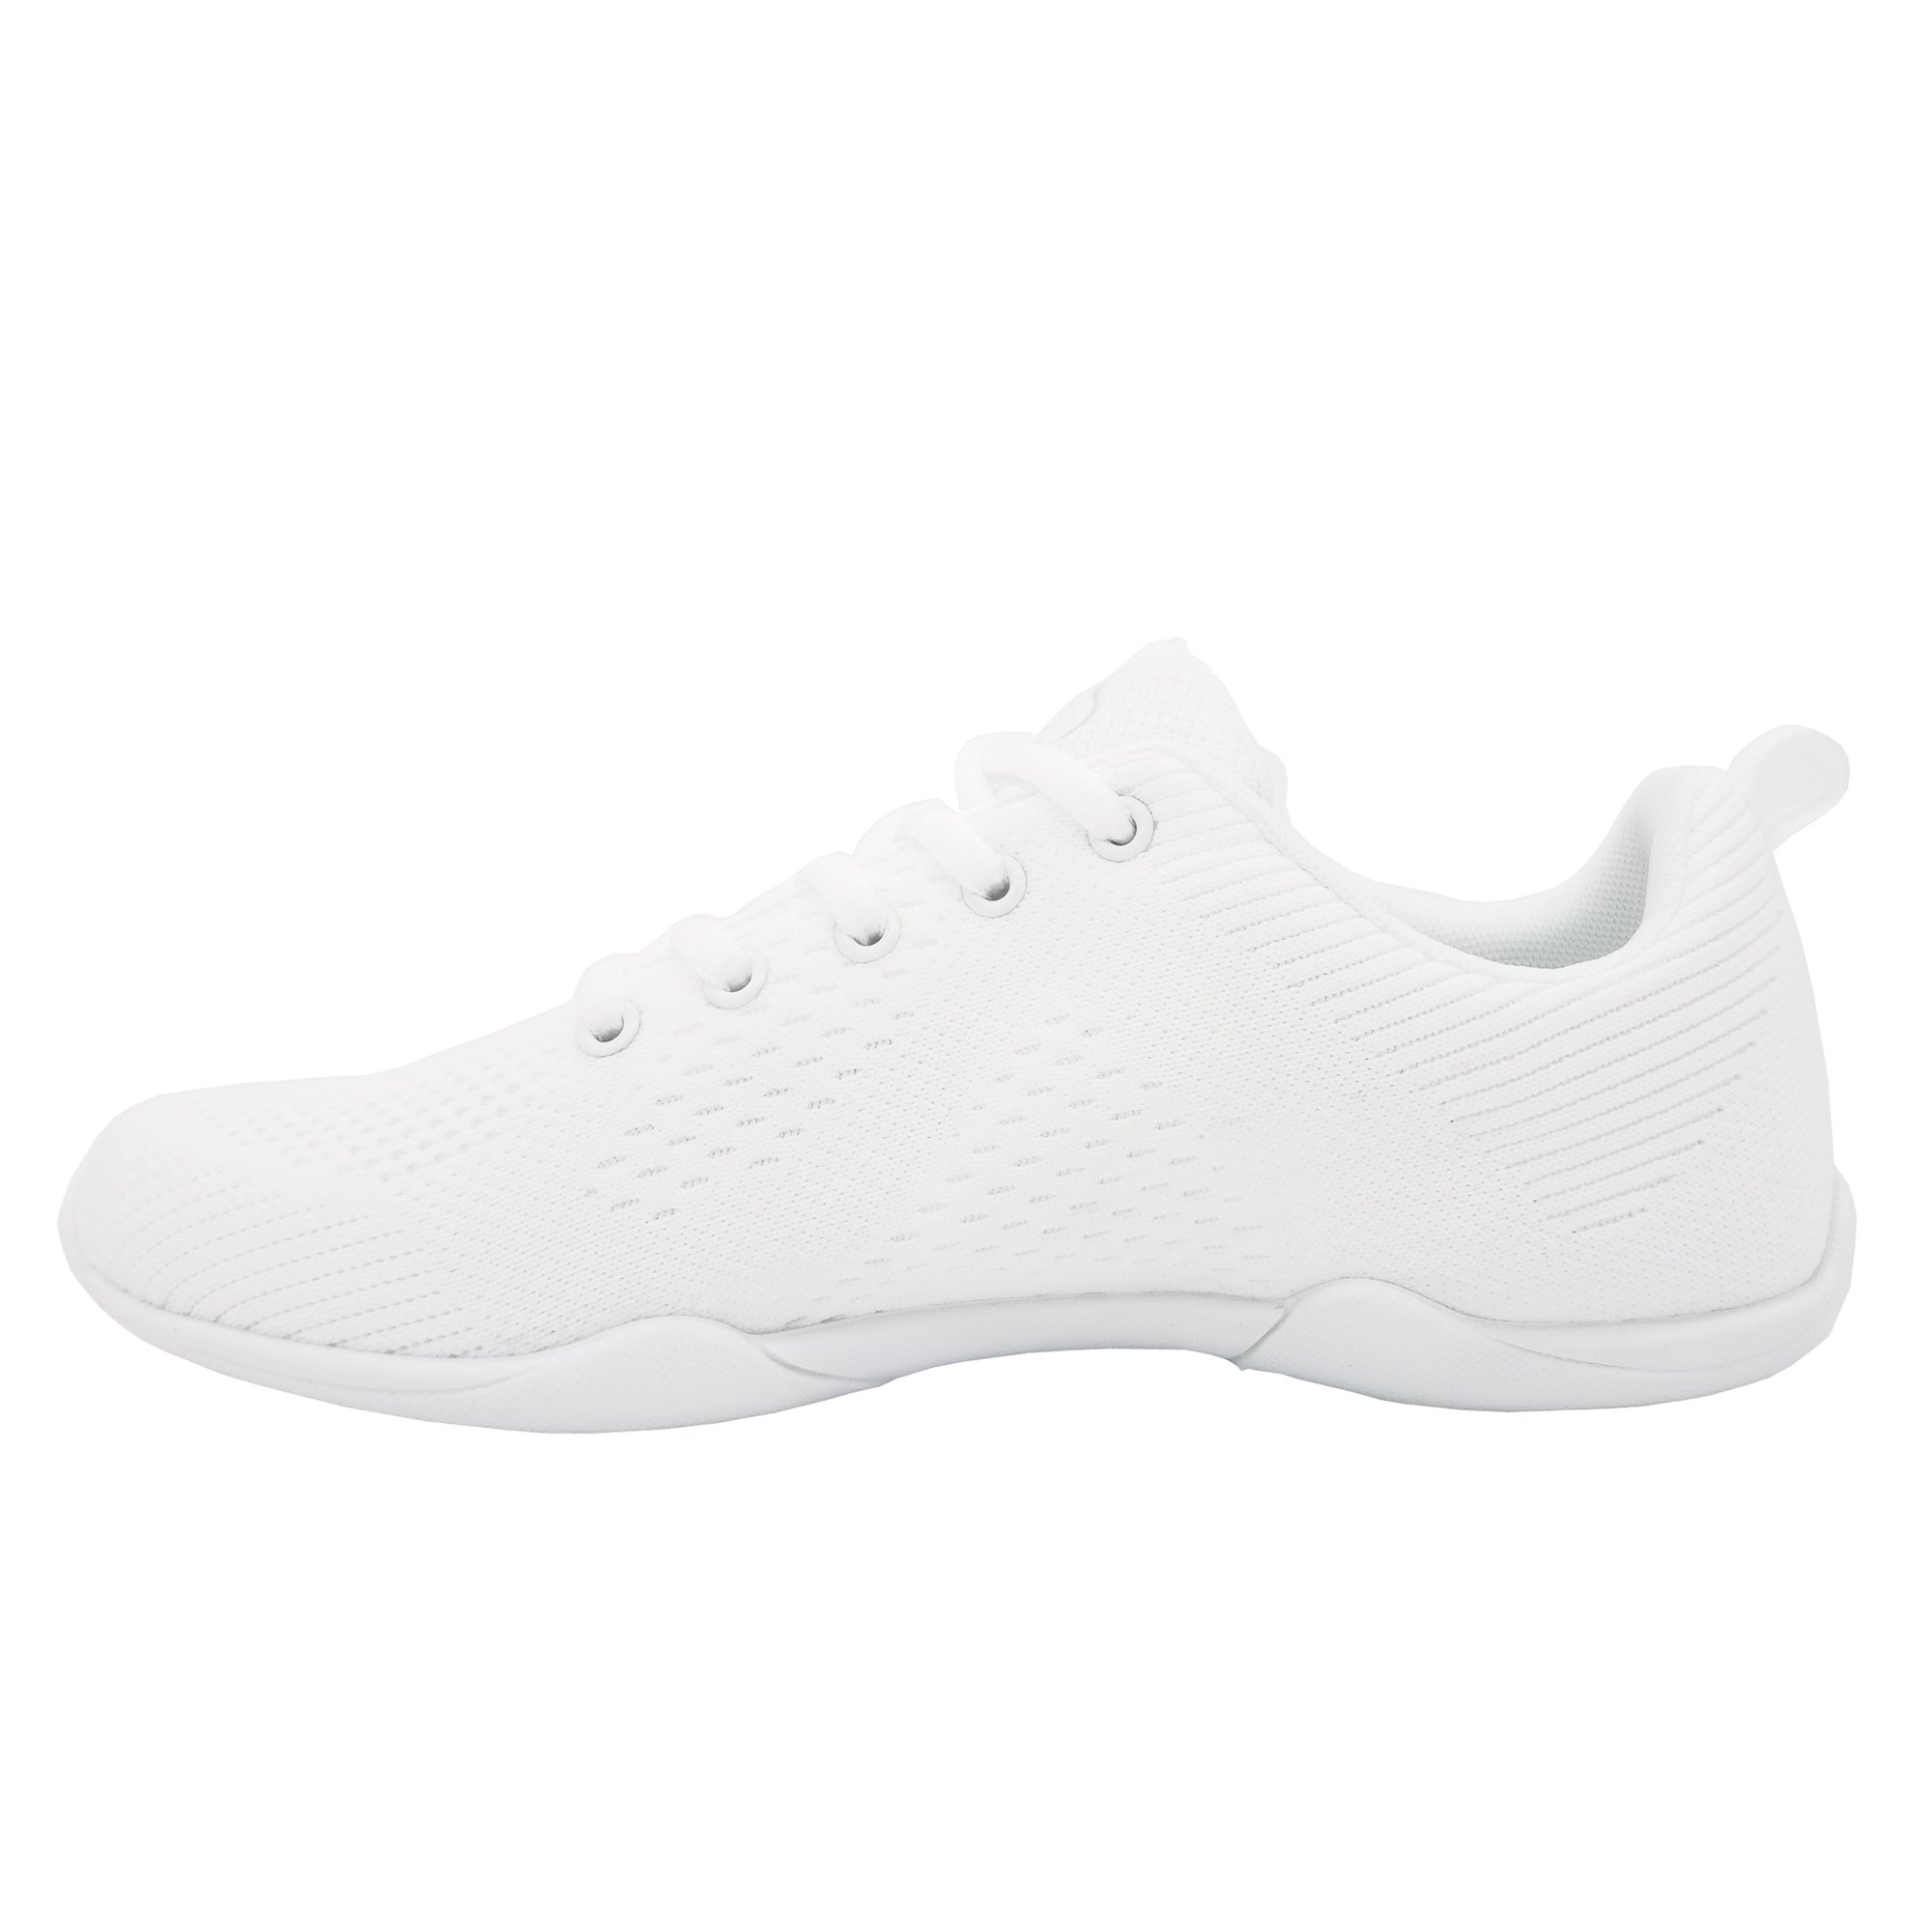 Danzcue Adult White Cheer Shoes